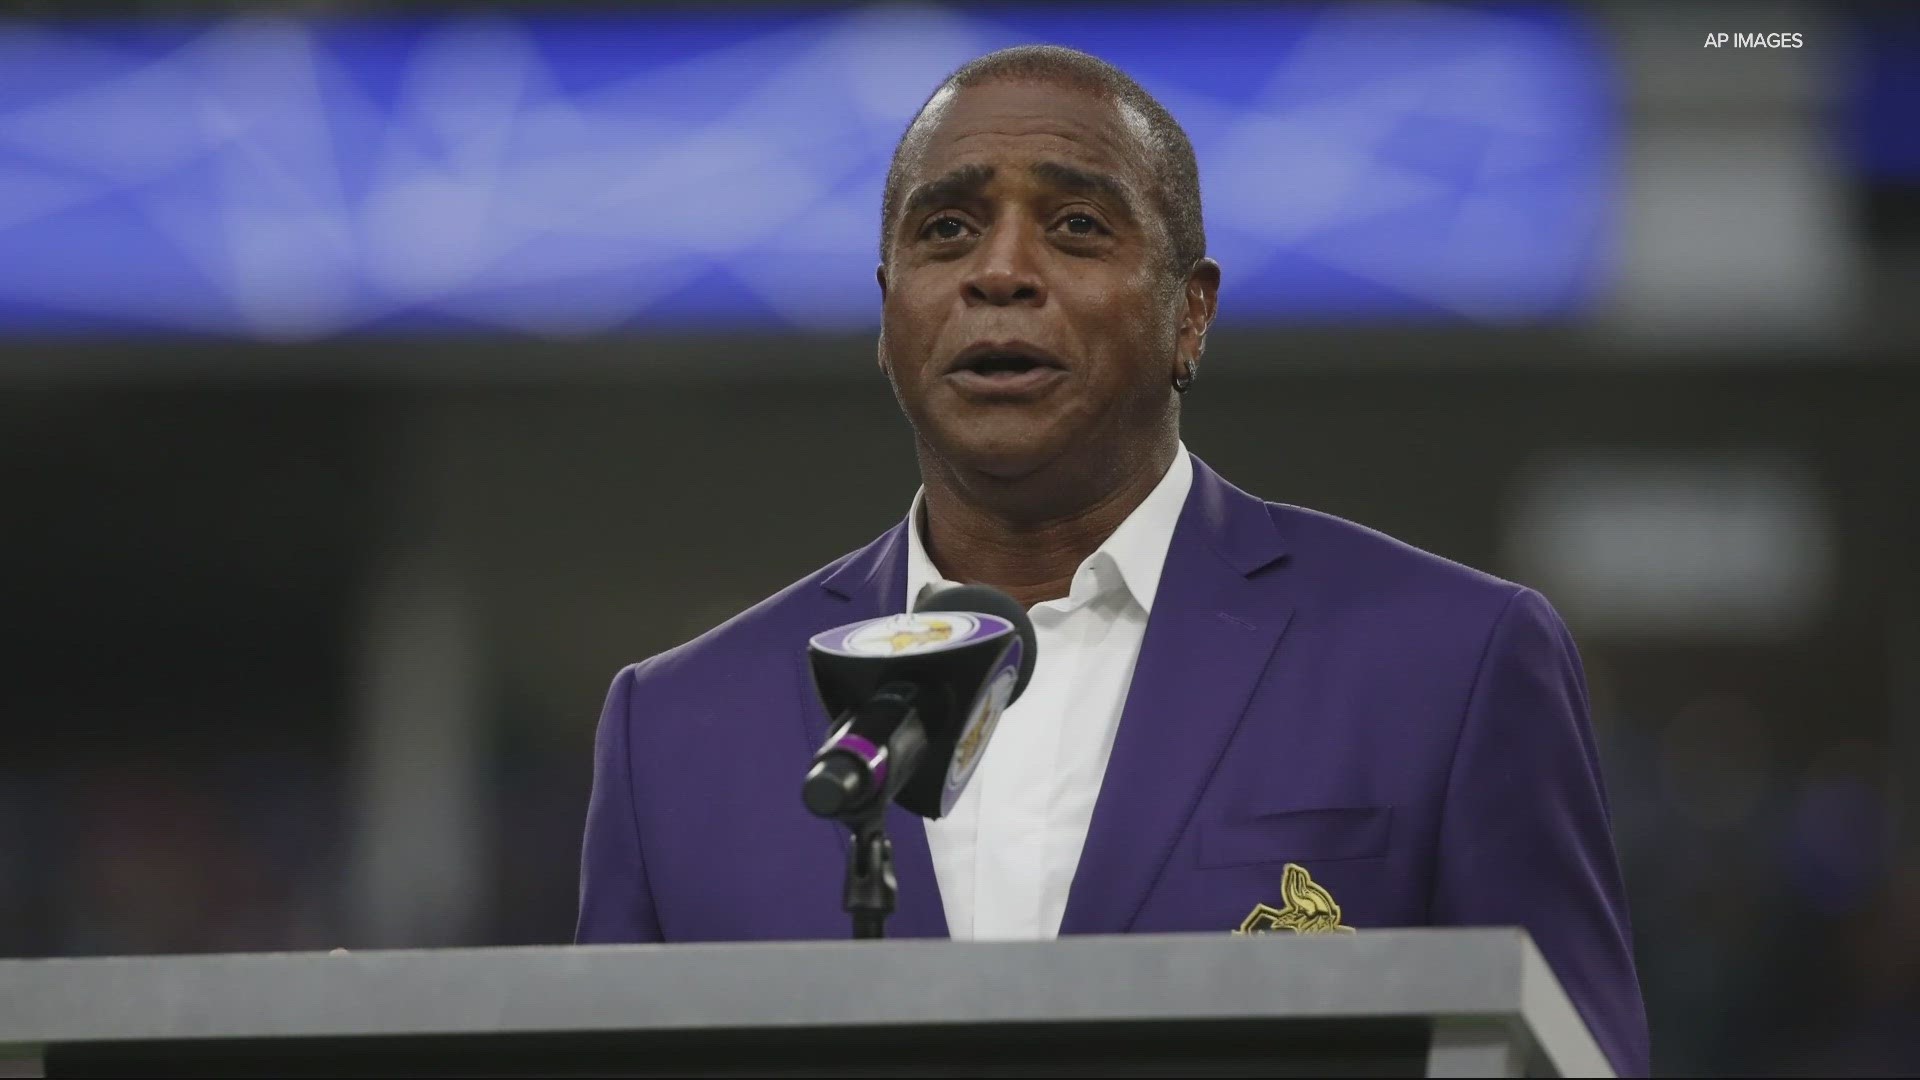 Former NFL wide receiver and Emmy Award winner Ahmad Rashad has built a legacy in the world of sports, with many of his first milestones rooted in Oregon.